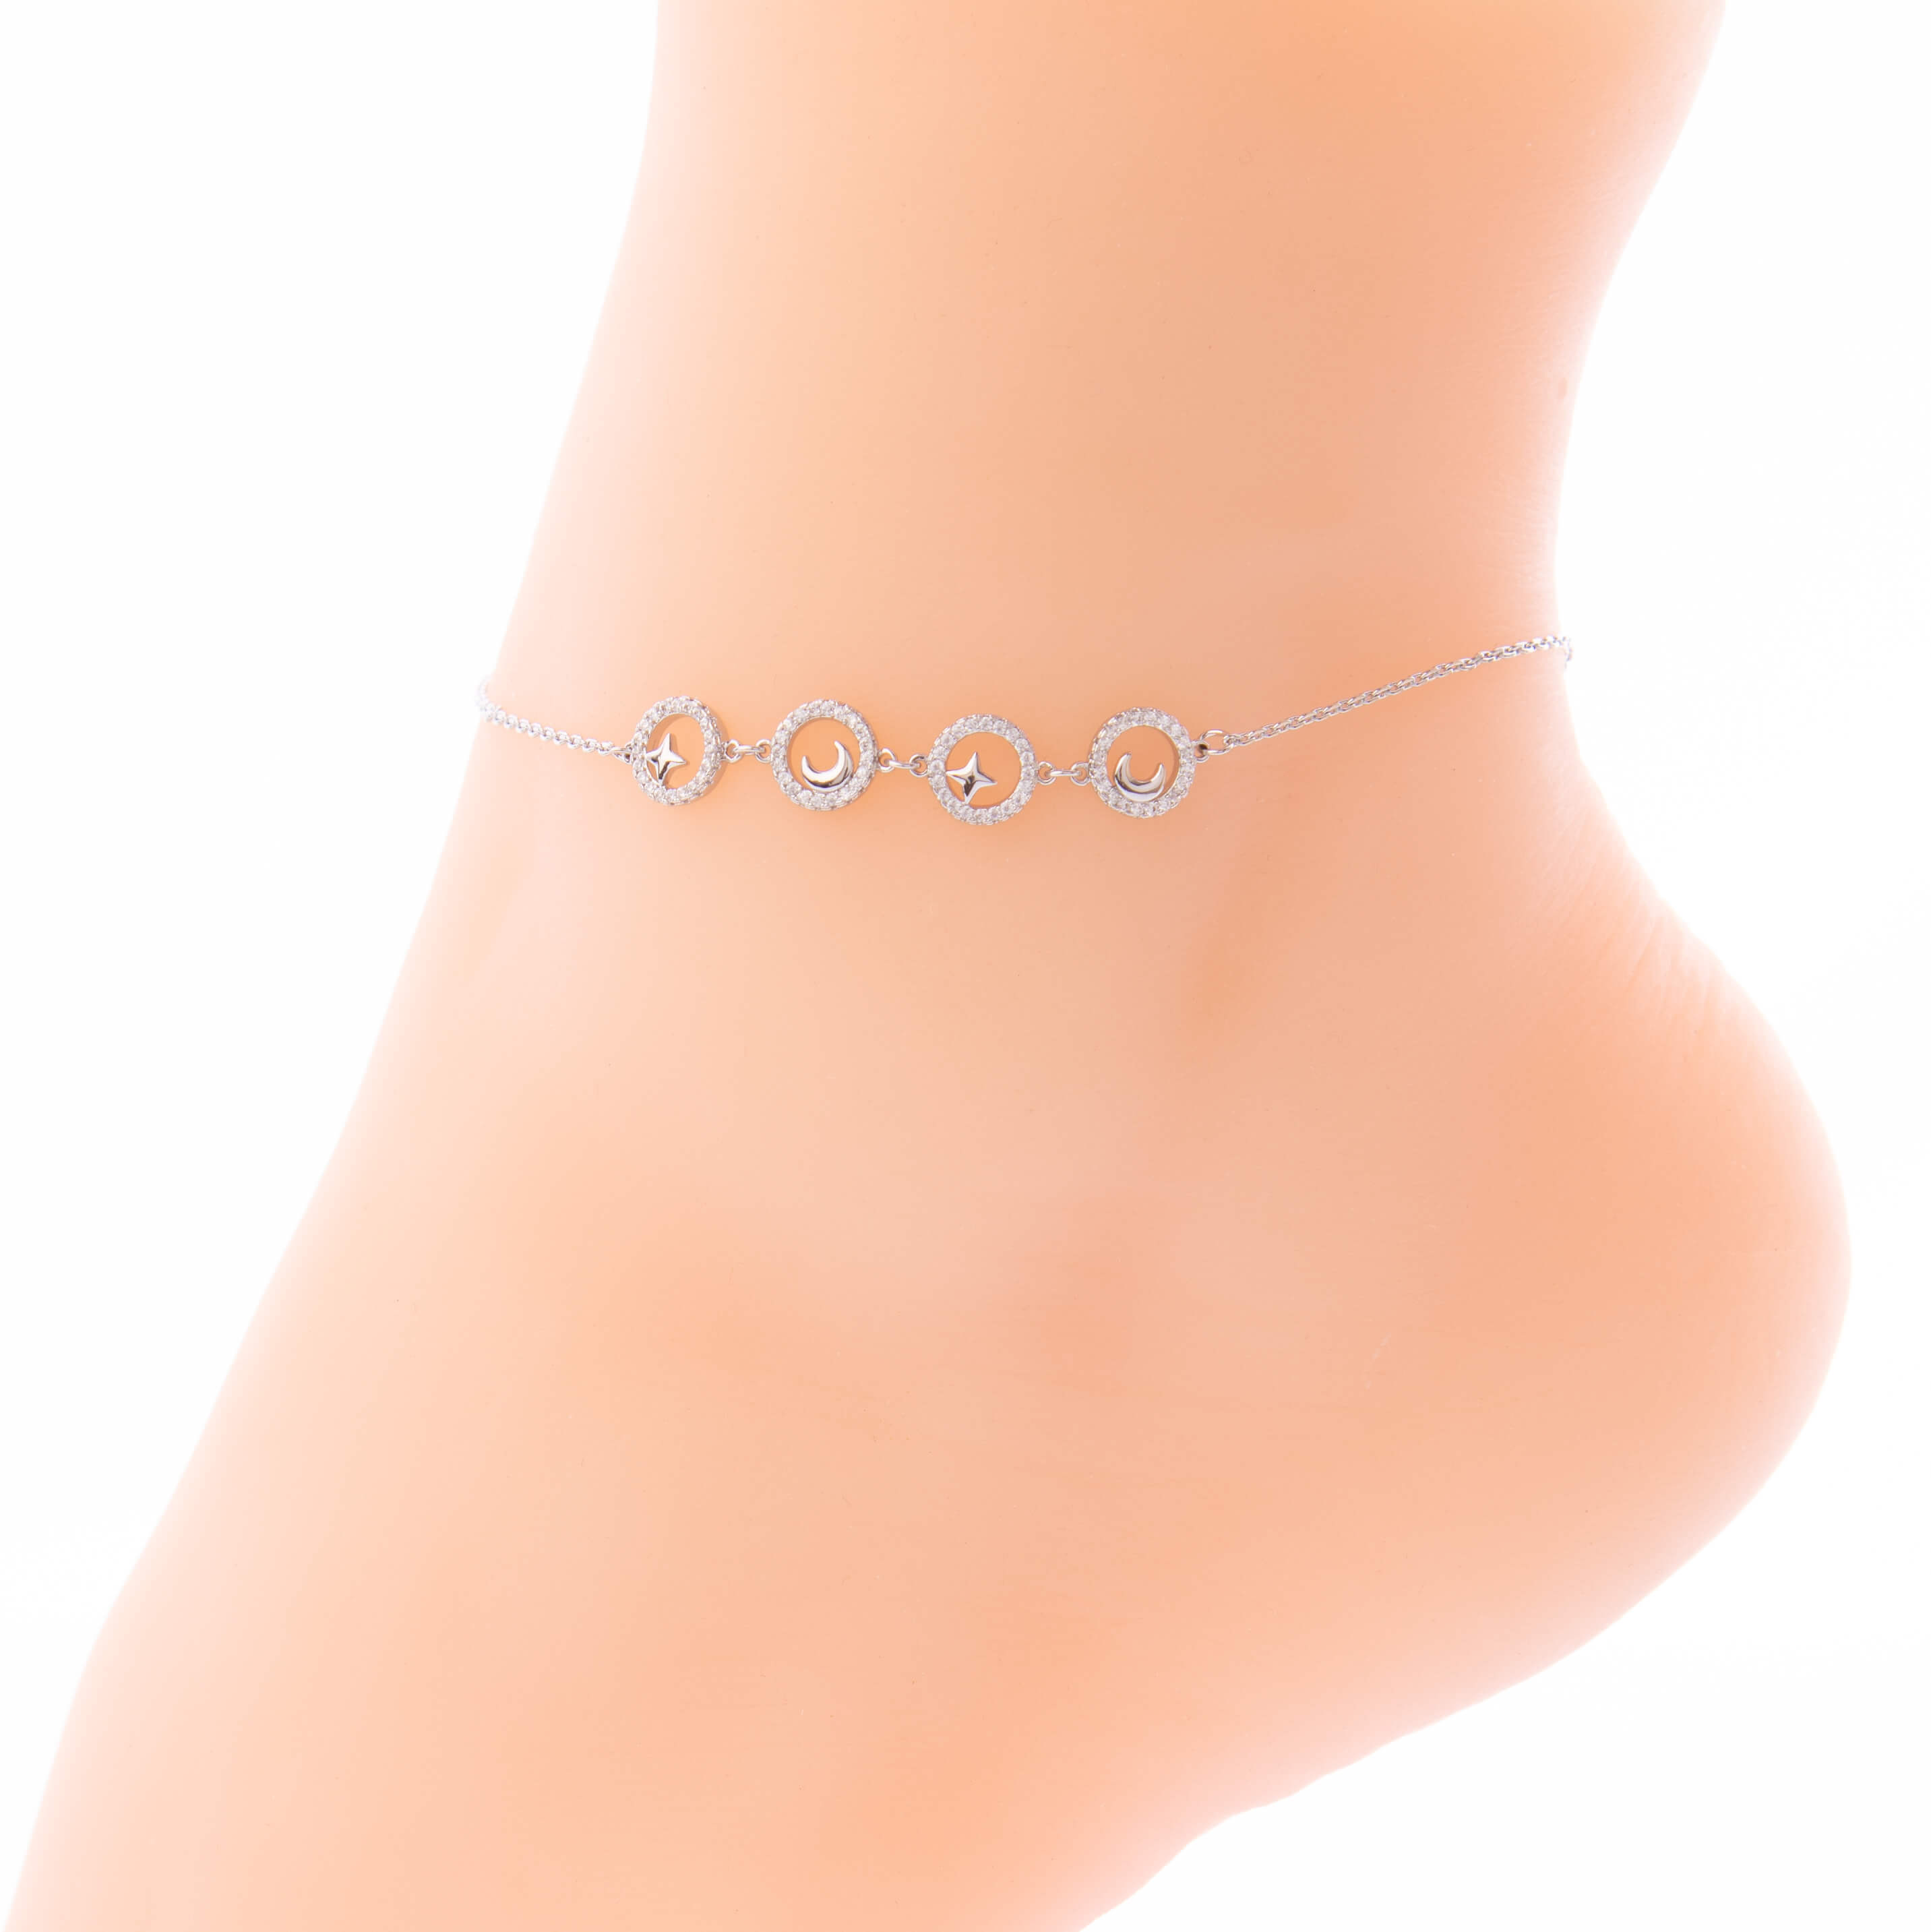 Silvery-plated anklet inlaid with zircon